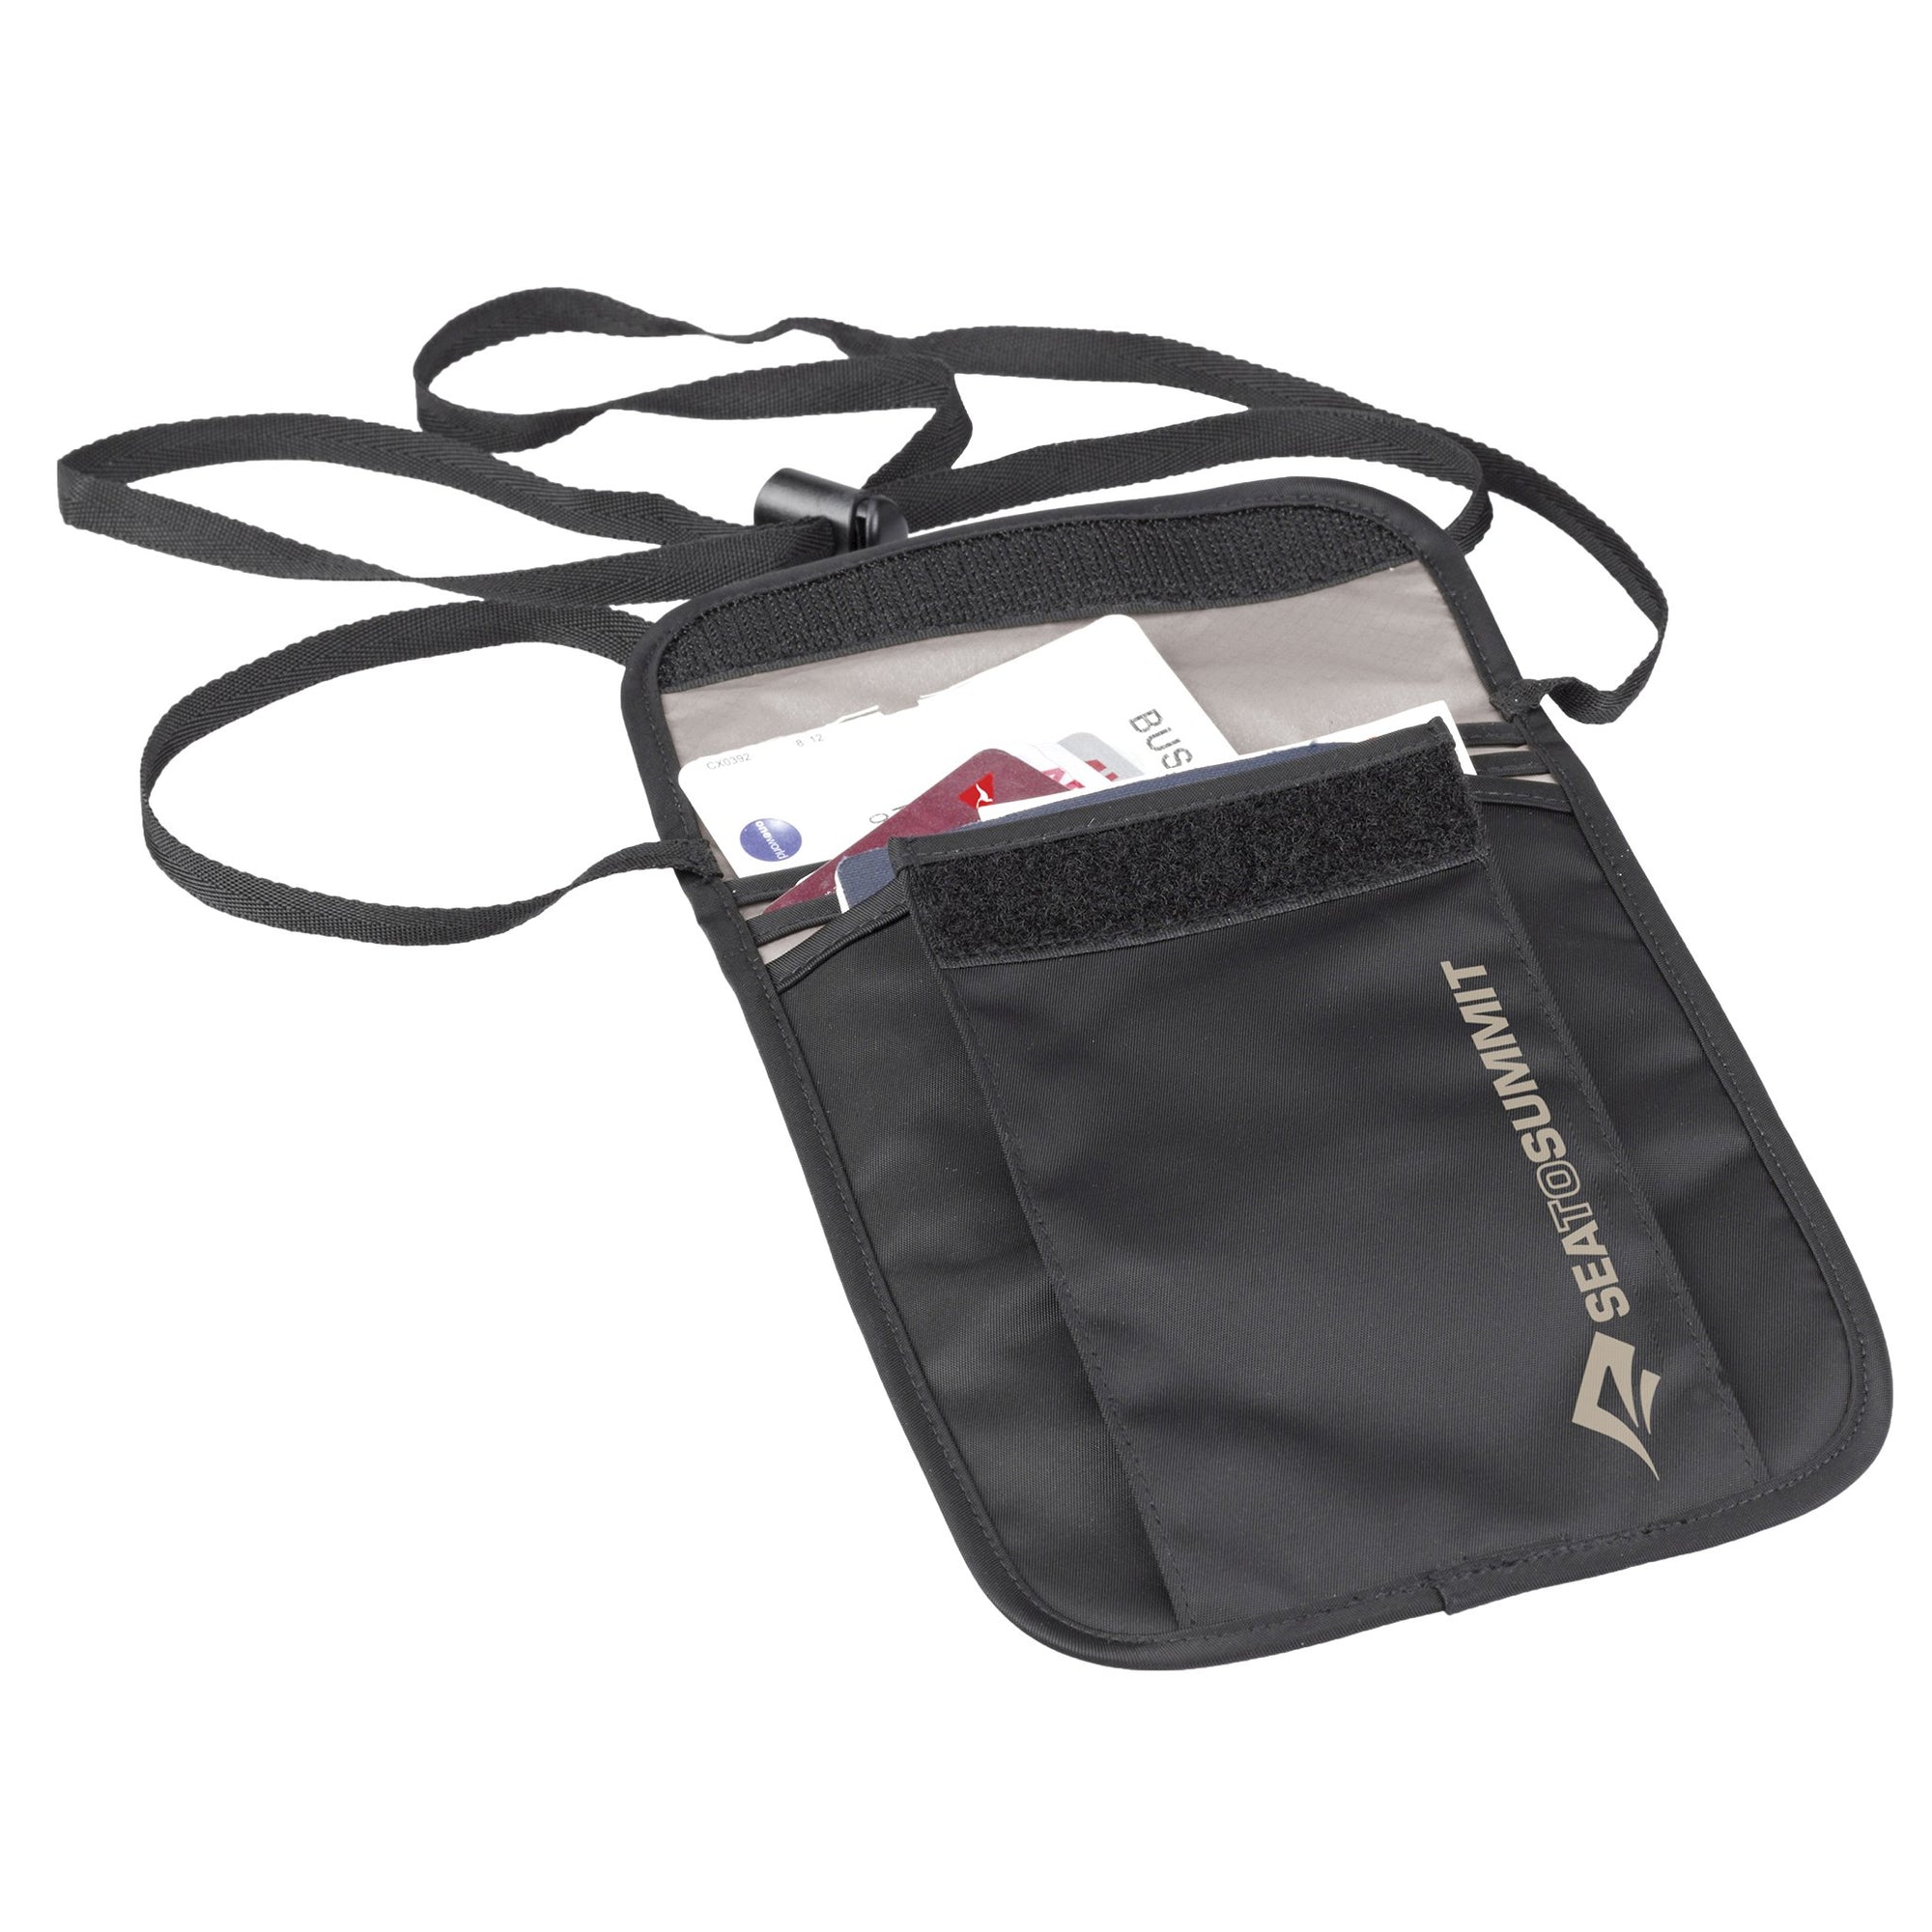 Traveling Light Neck Pouch Large